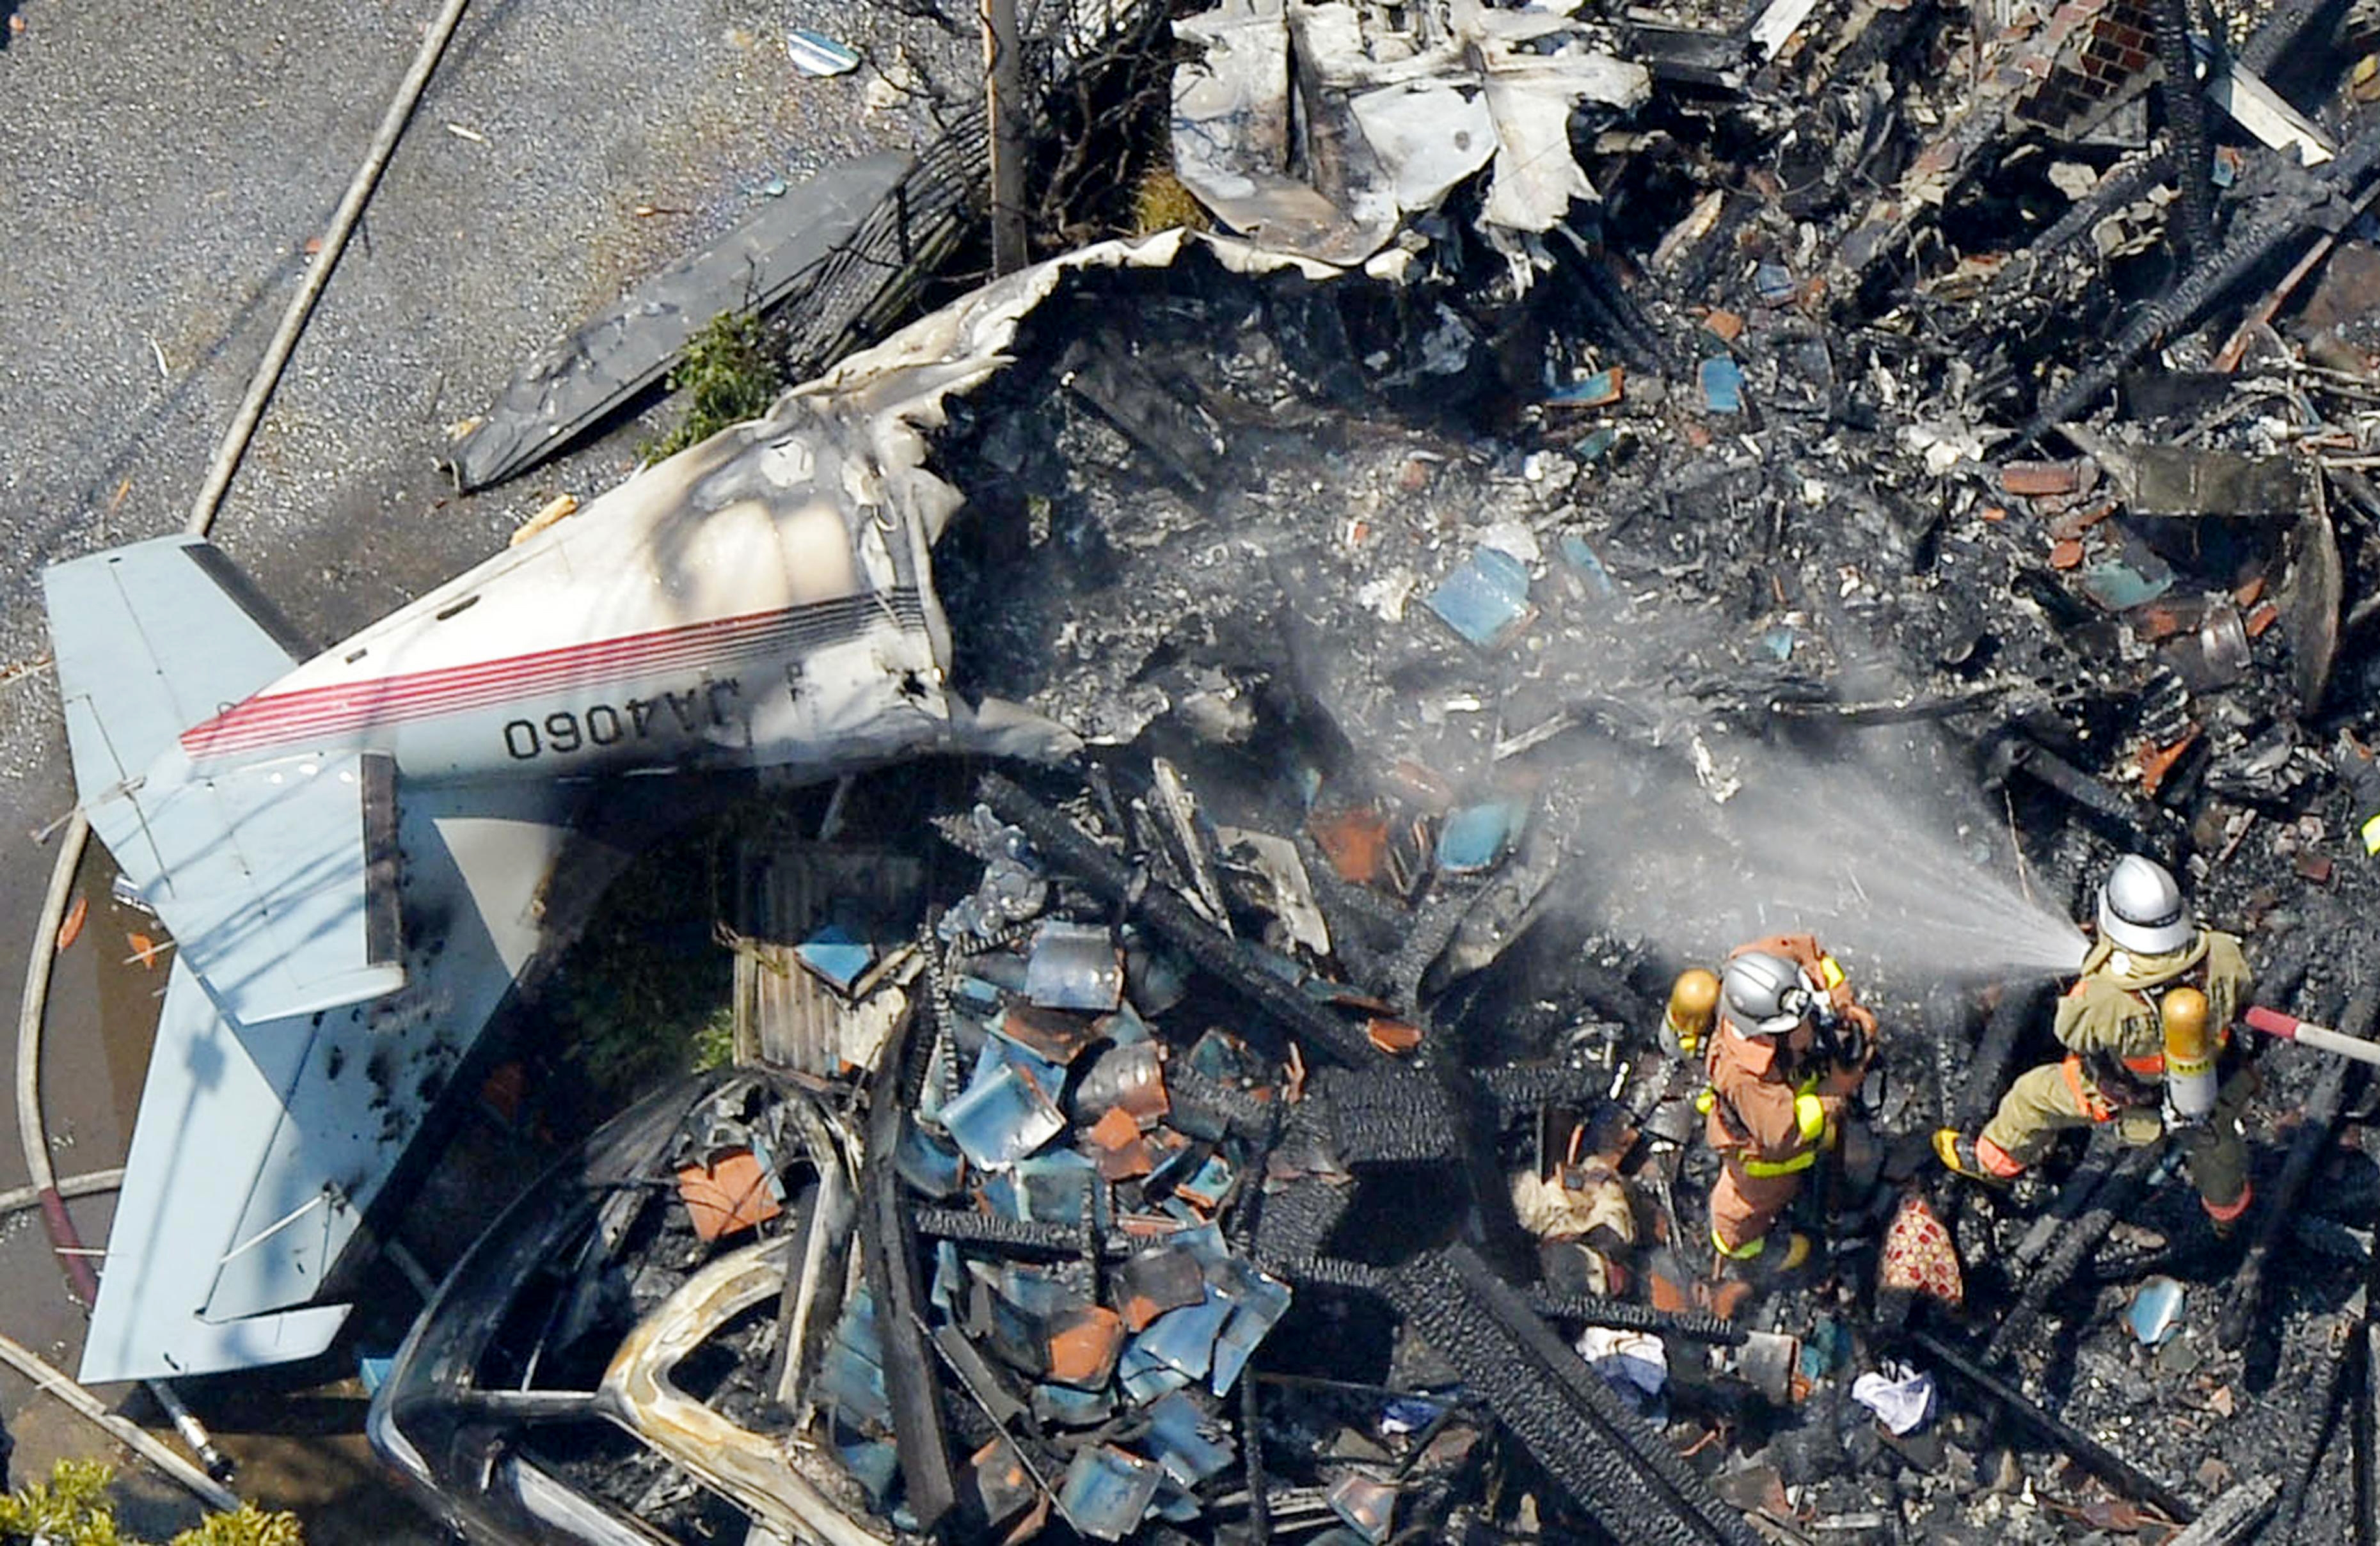 The wreckage of a plane is seen at a crash site in a suburb of Tokyo. (AP)